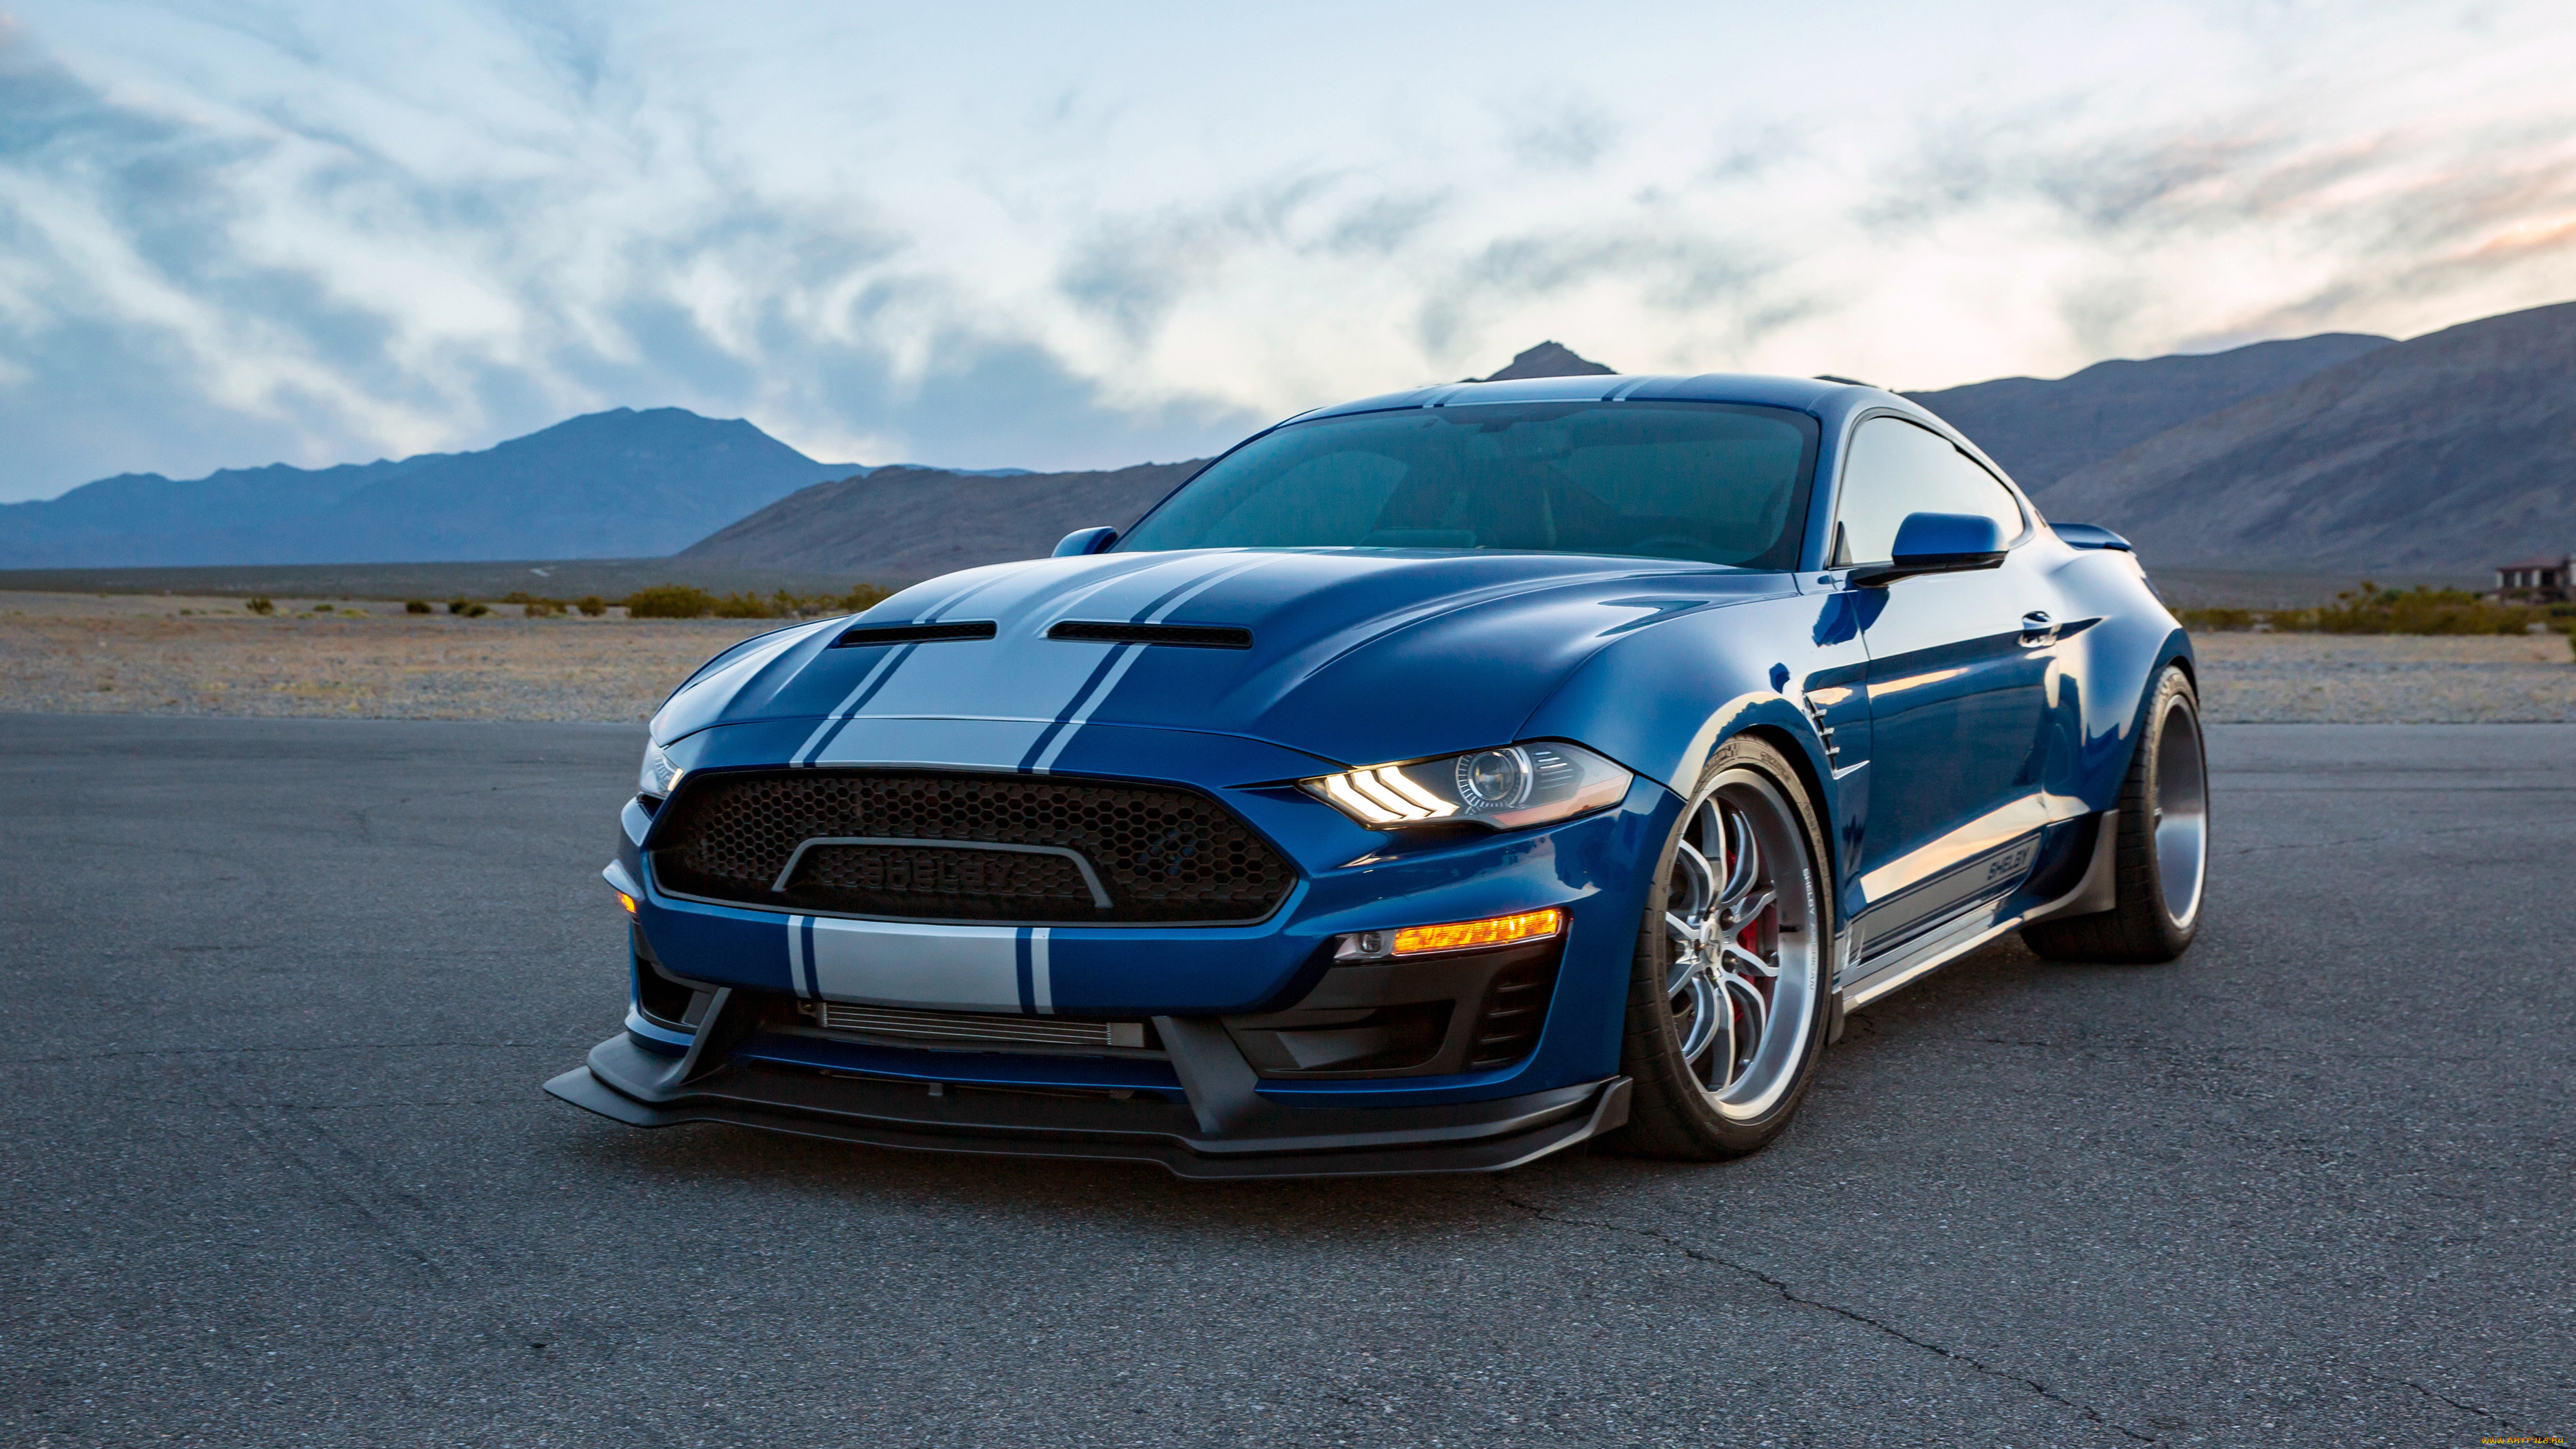 2018 mustang shelby super snake wide body, , mustang, 2018, shelby, super, snake, wide, body, , 